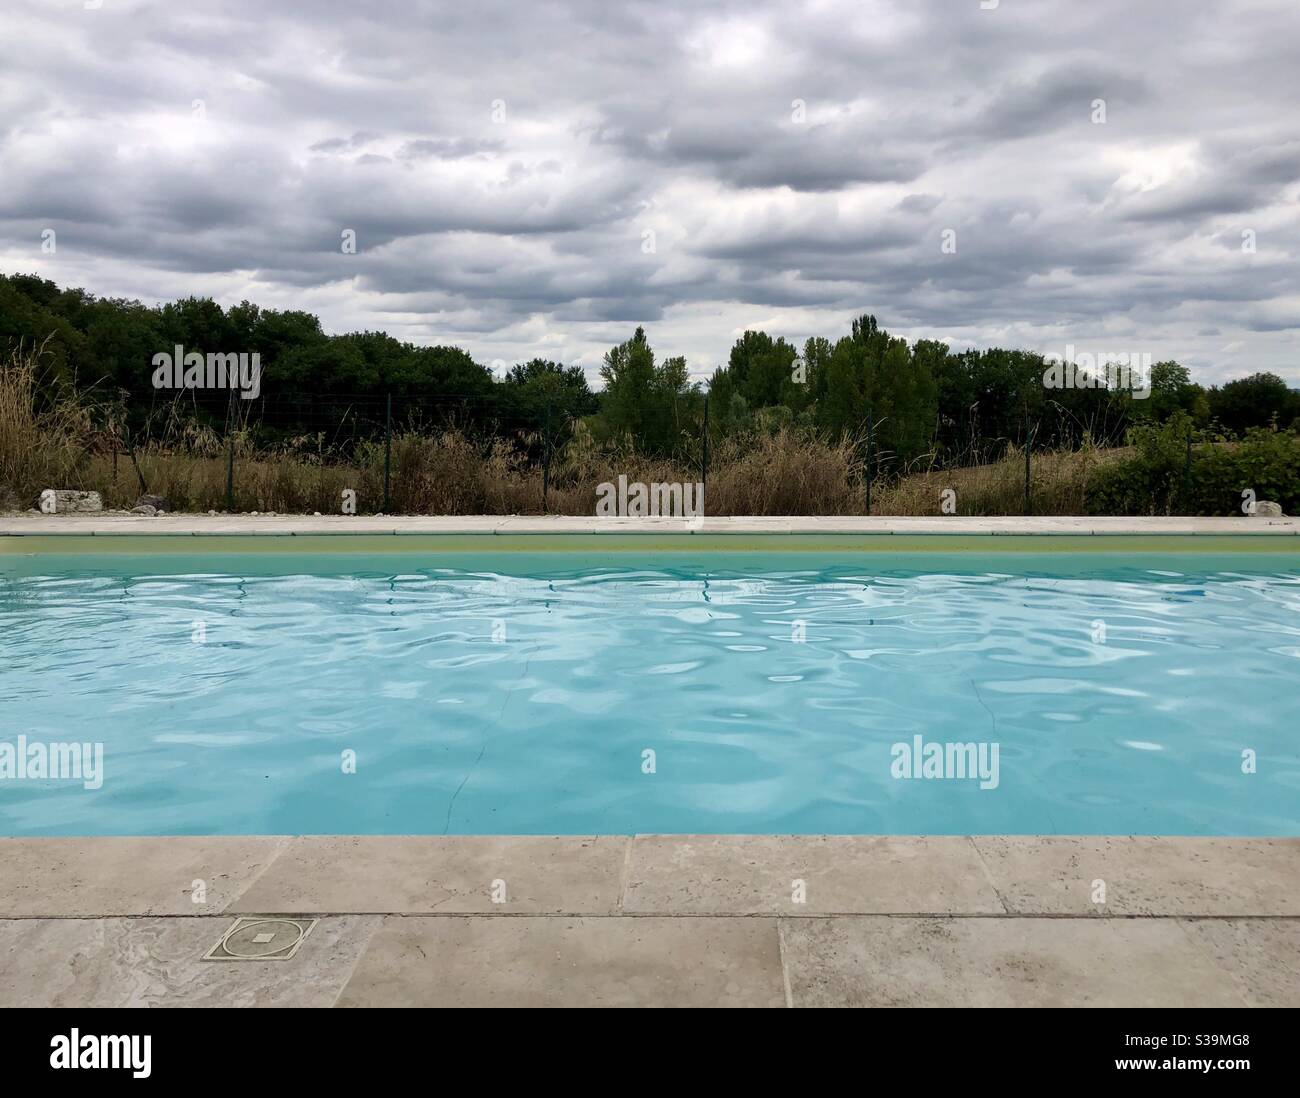 Contrast of blue swimming pool water and dark moody sky Stock Photo